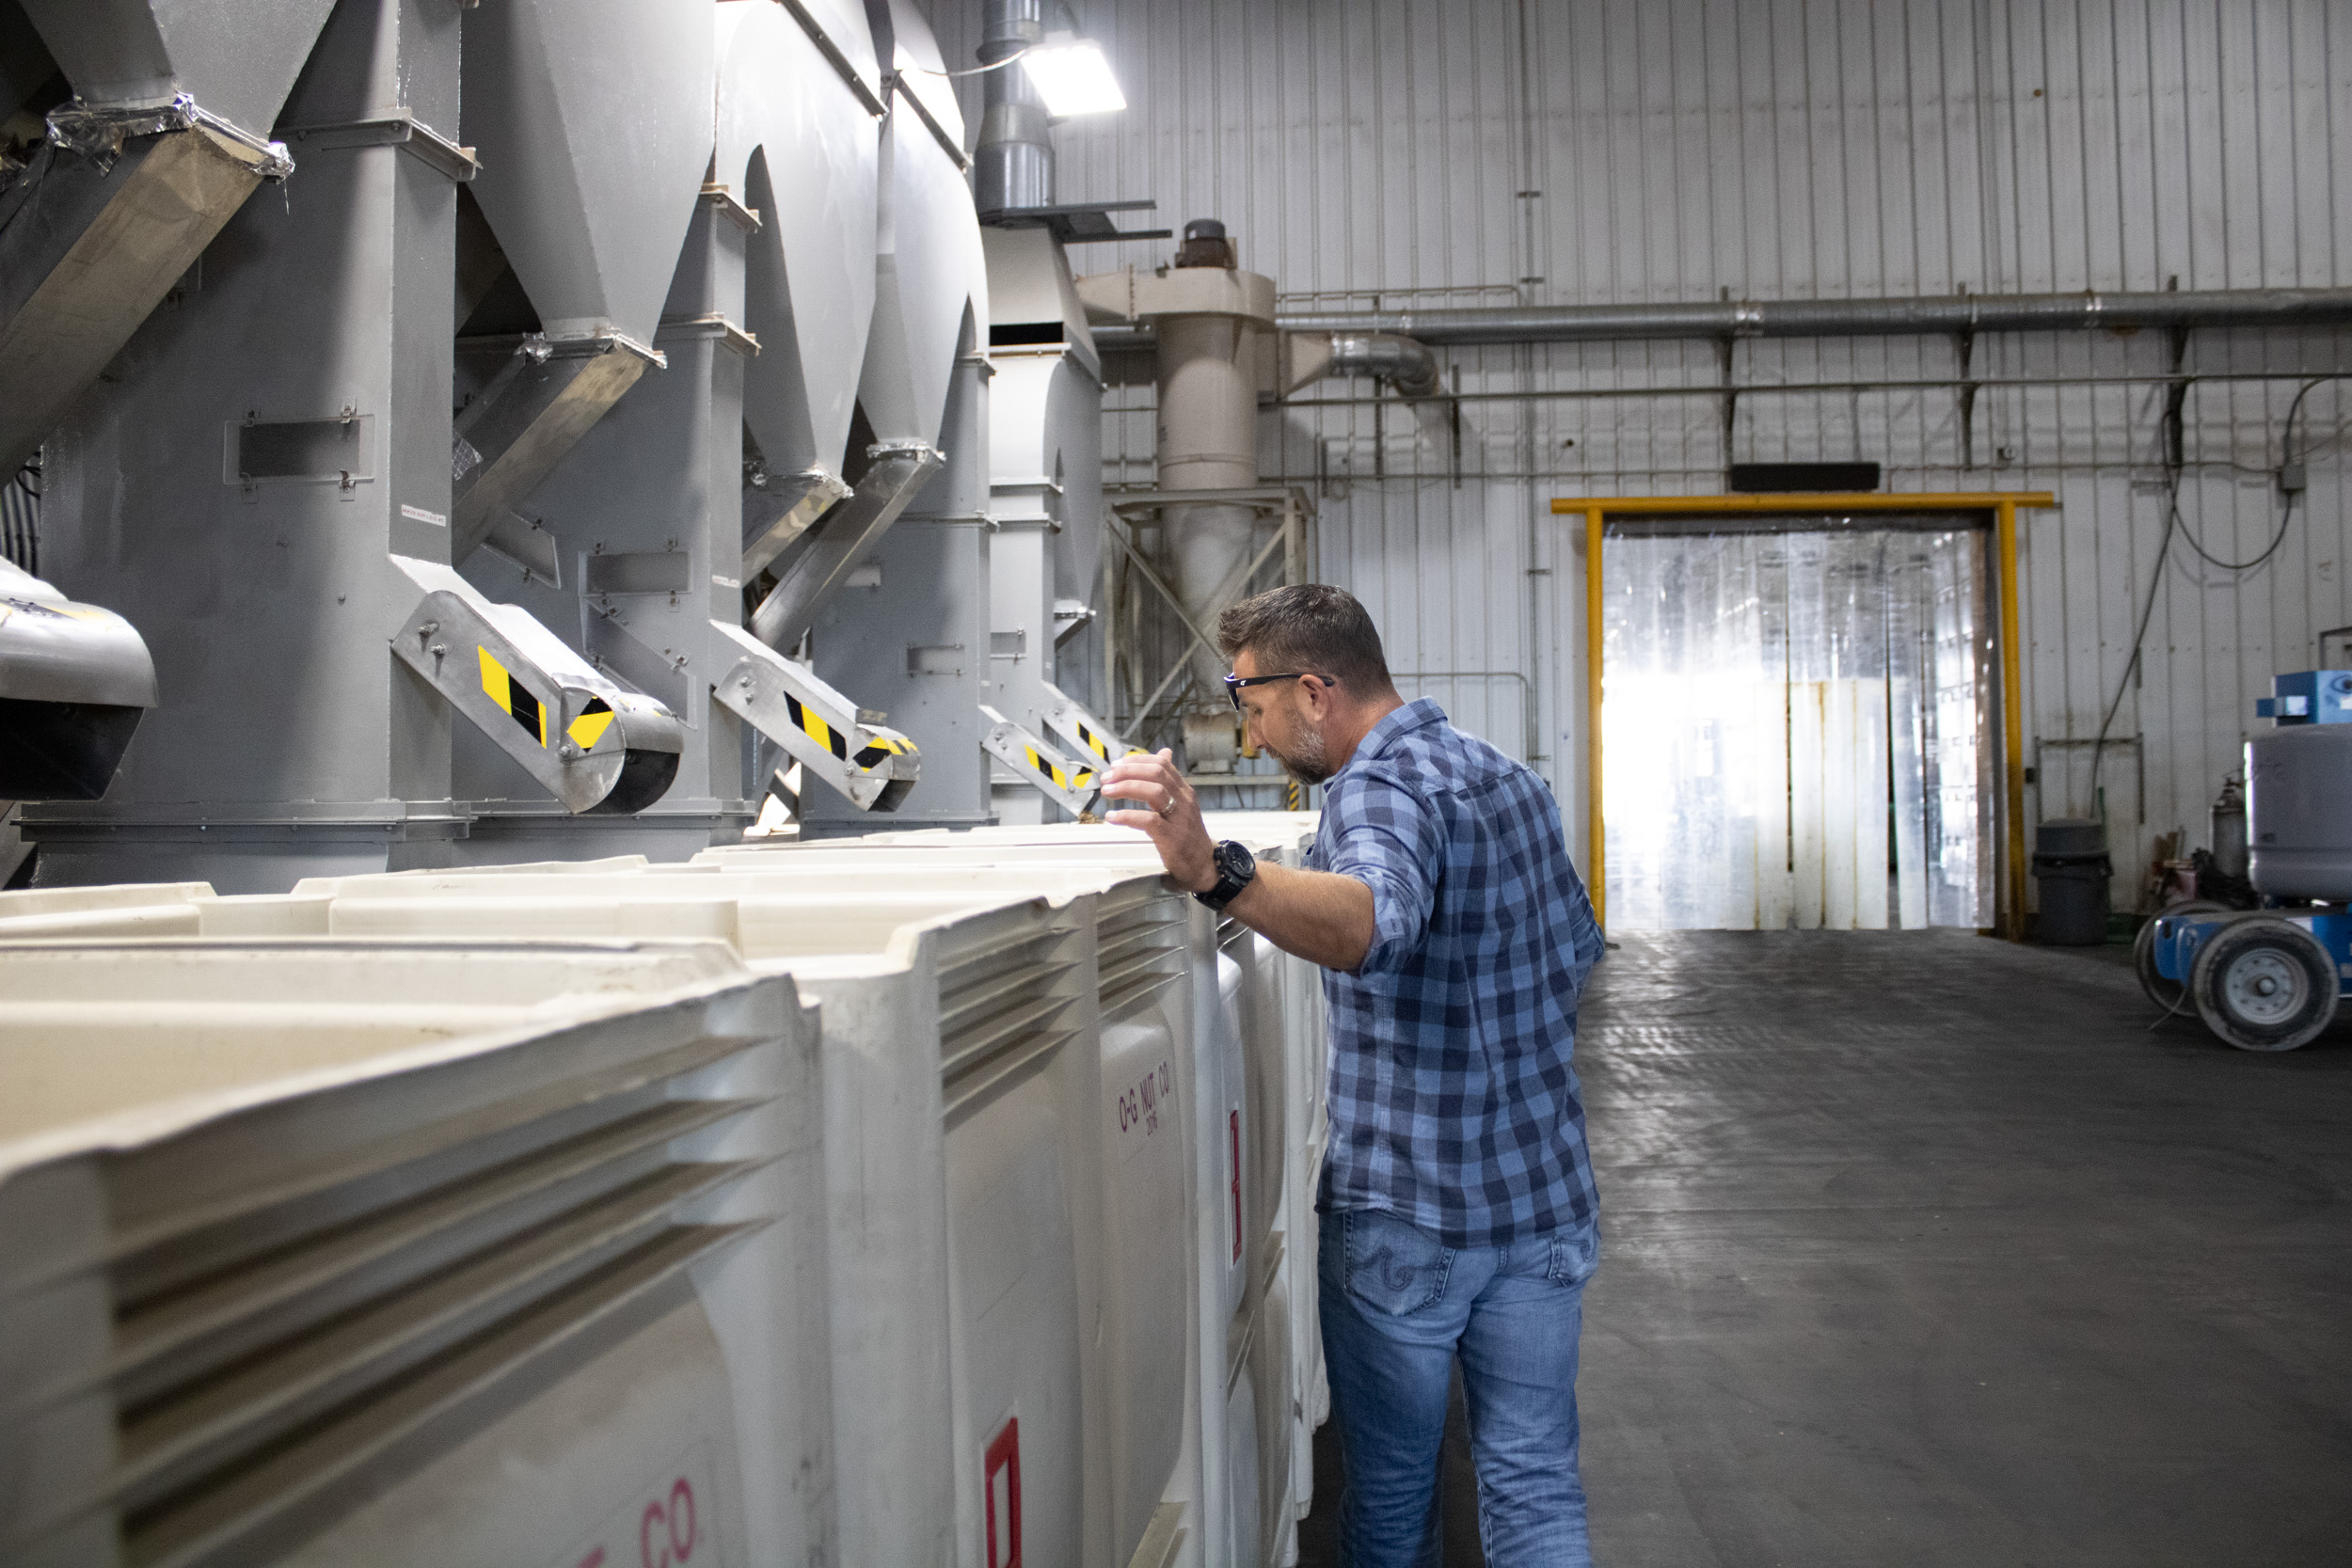 A white man, with short brown hair, wearing a blue shirt and blue jeans, looks into white bins that are almost as tall as he is. A large sorting machine with five sorting shoots sits above the bins, to the left of the man.